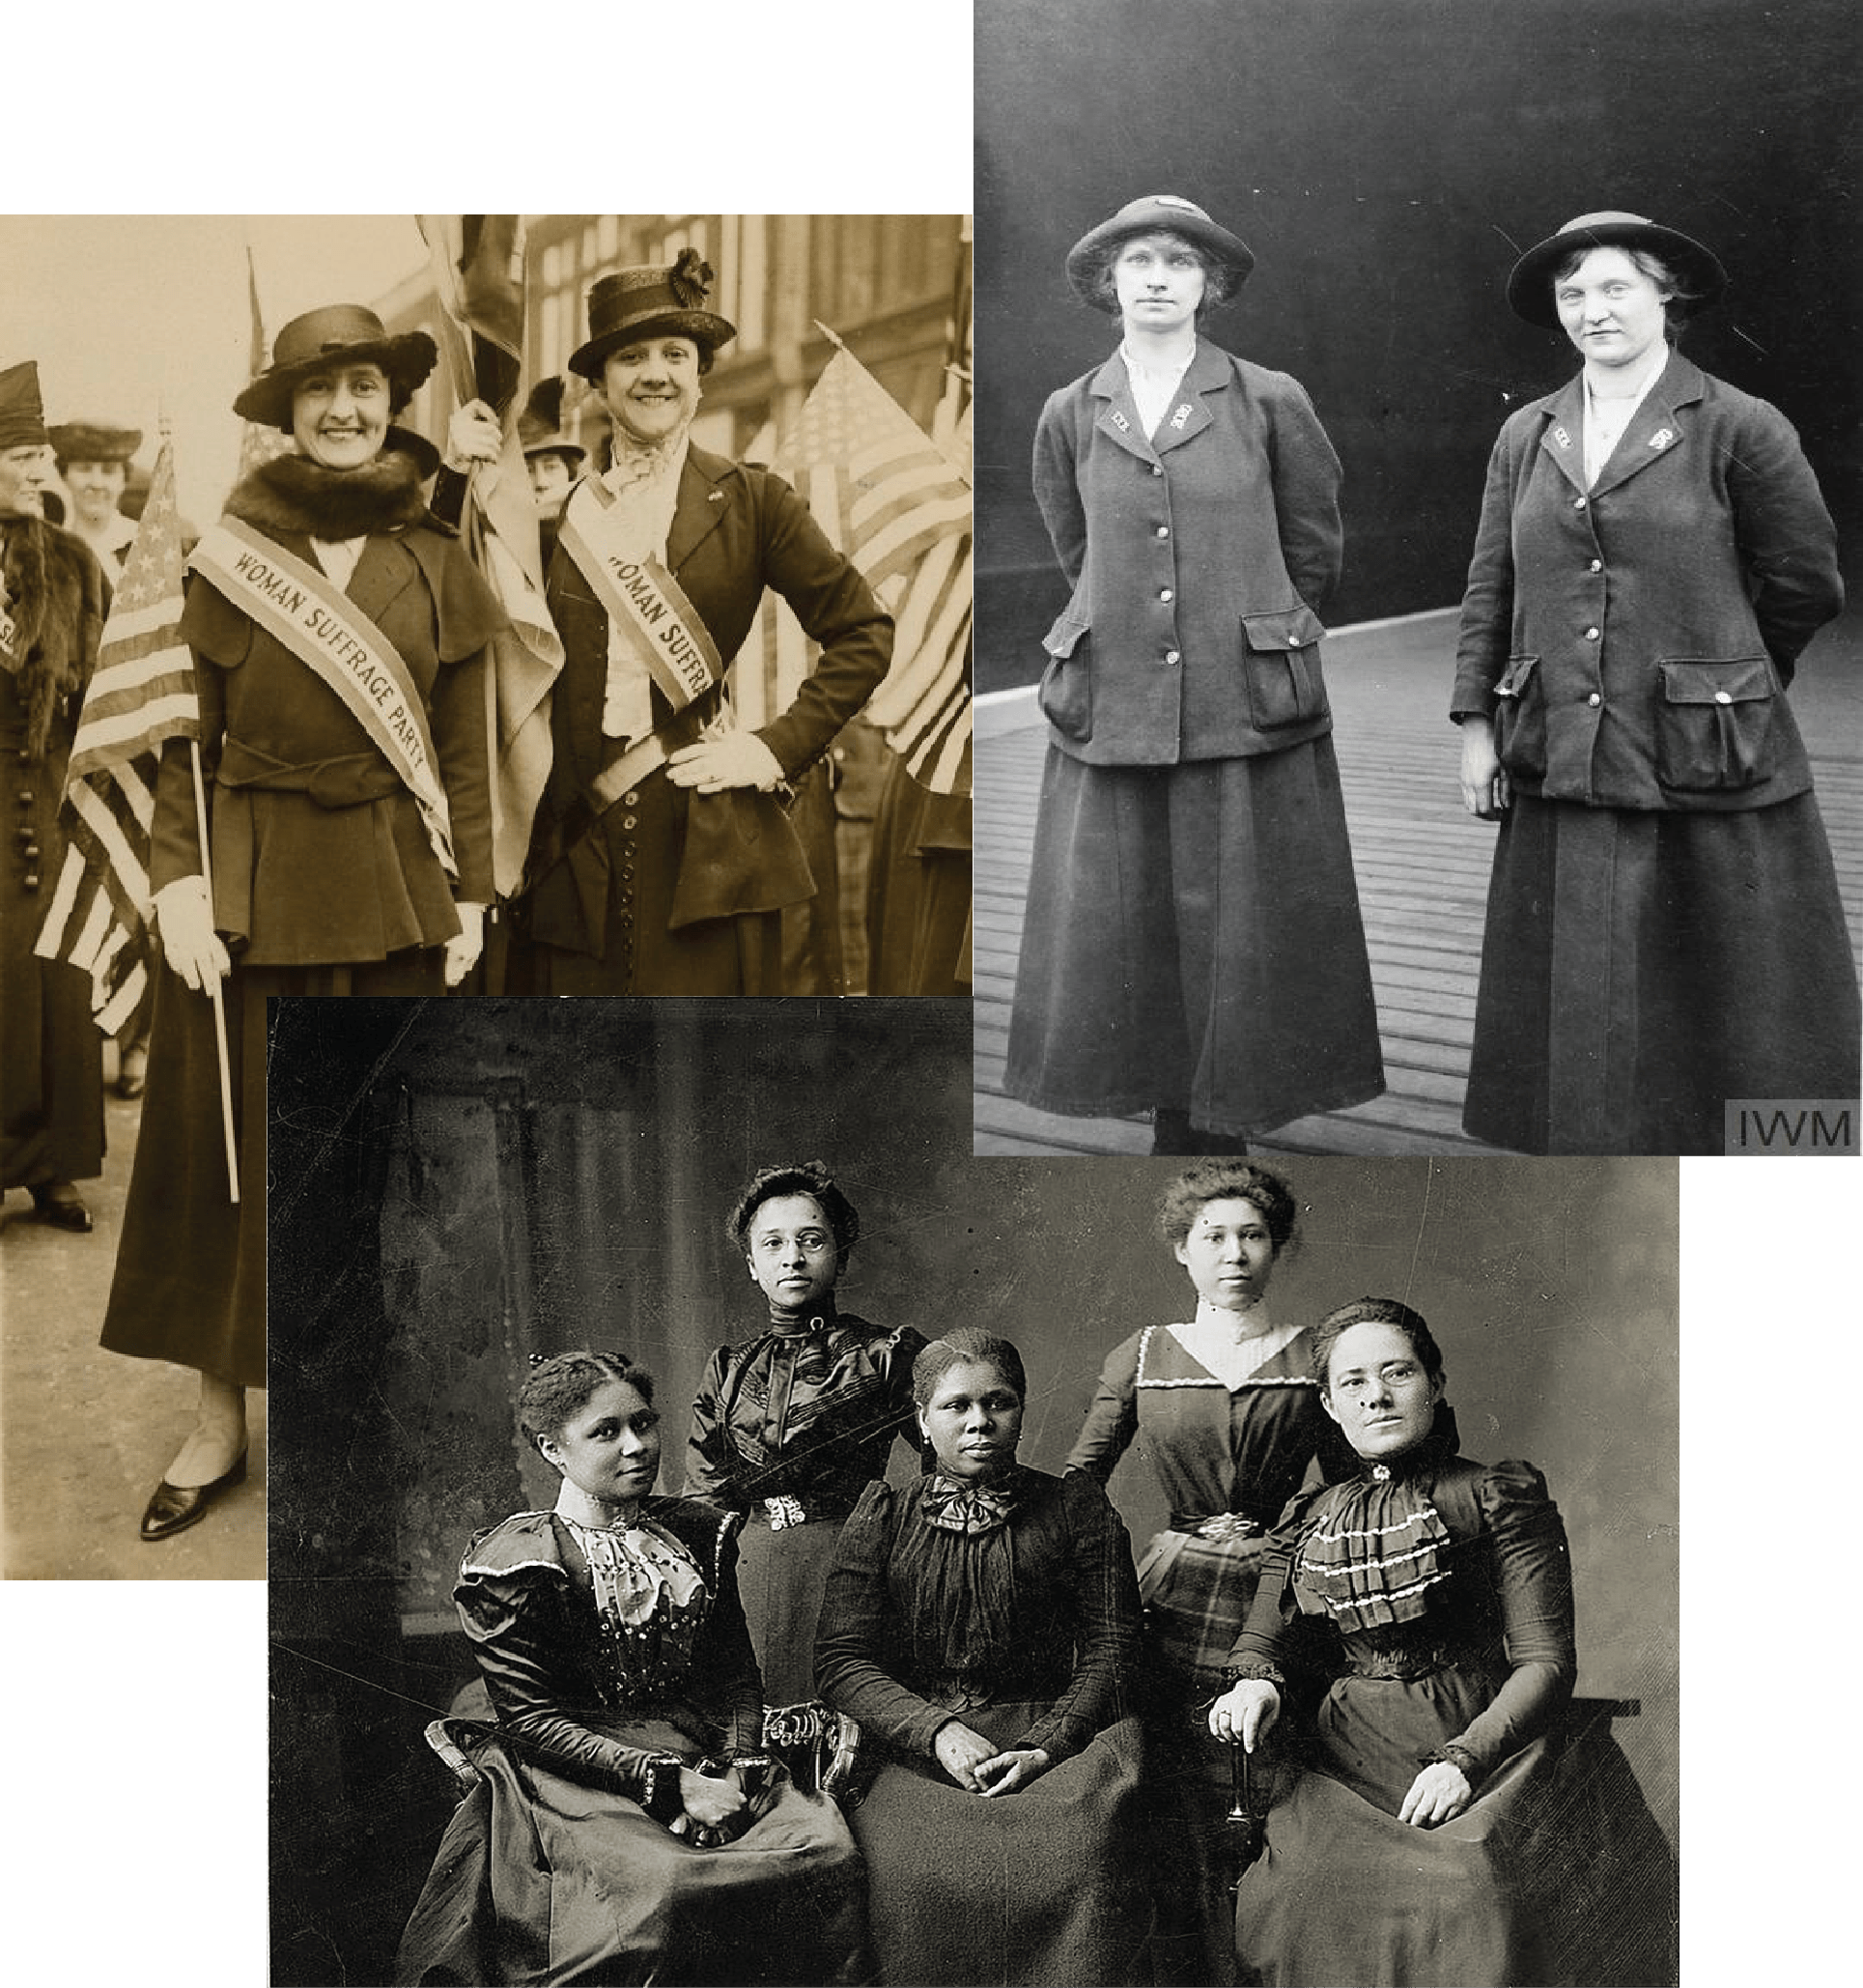 The suffragette movement that featured black and white women fighting for liberty and freedom wearing suffragette suit